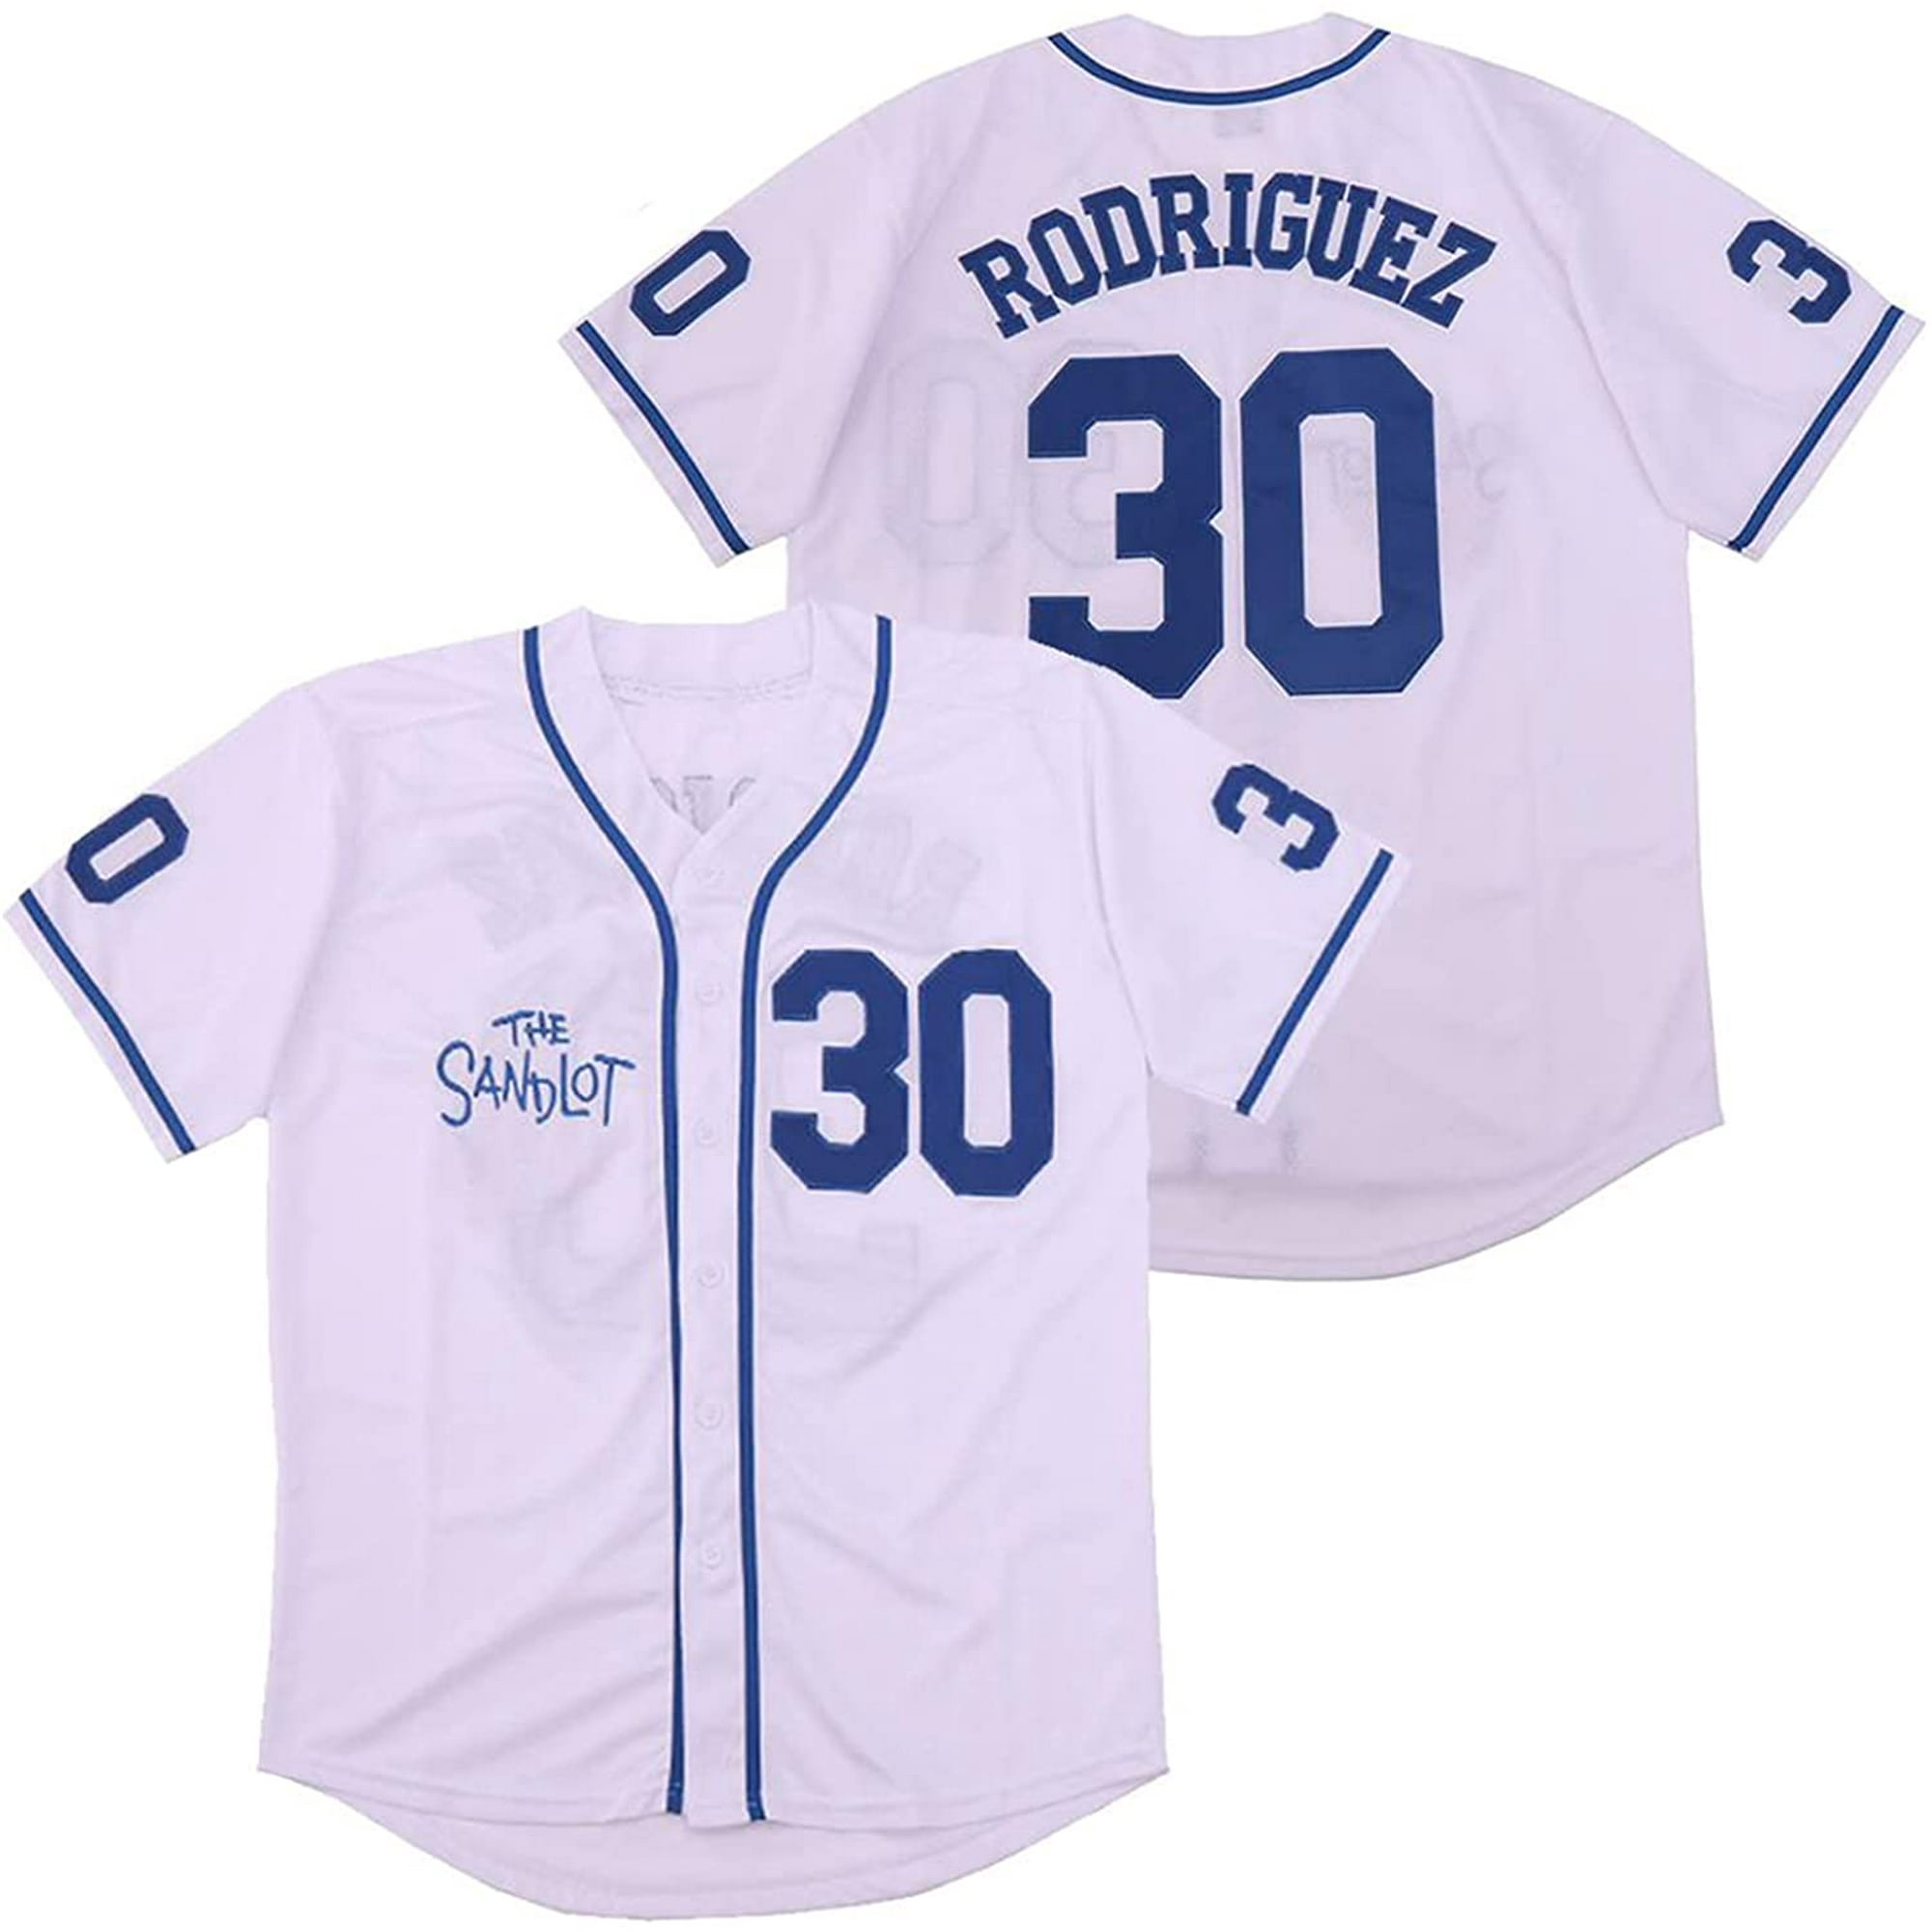 rodriguez jersey number